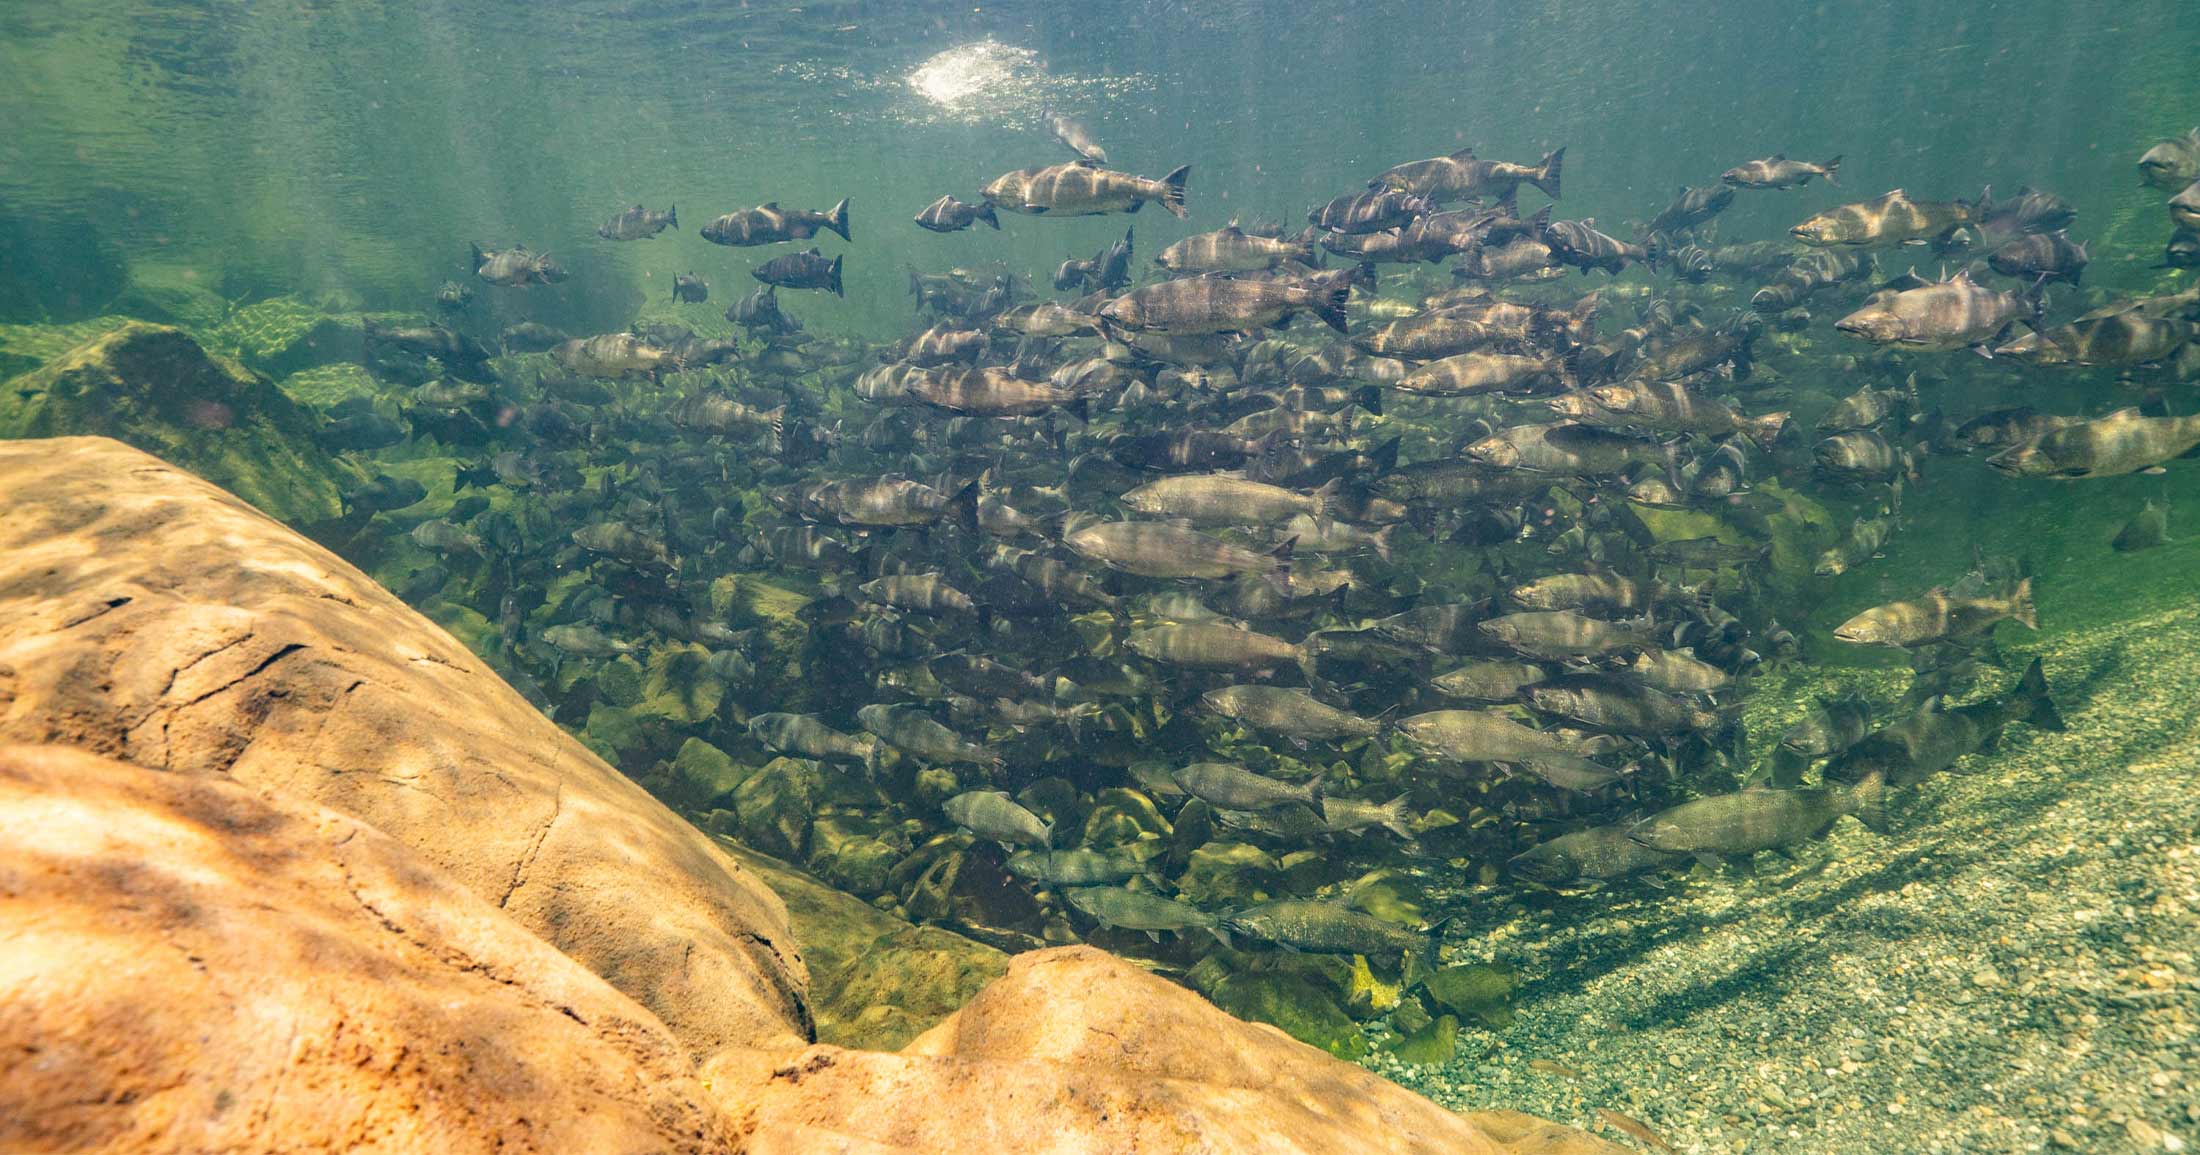 A school of salmon as seen from below in the Fraser River.